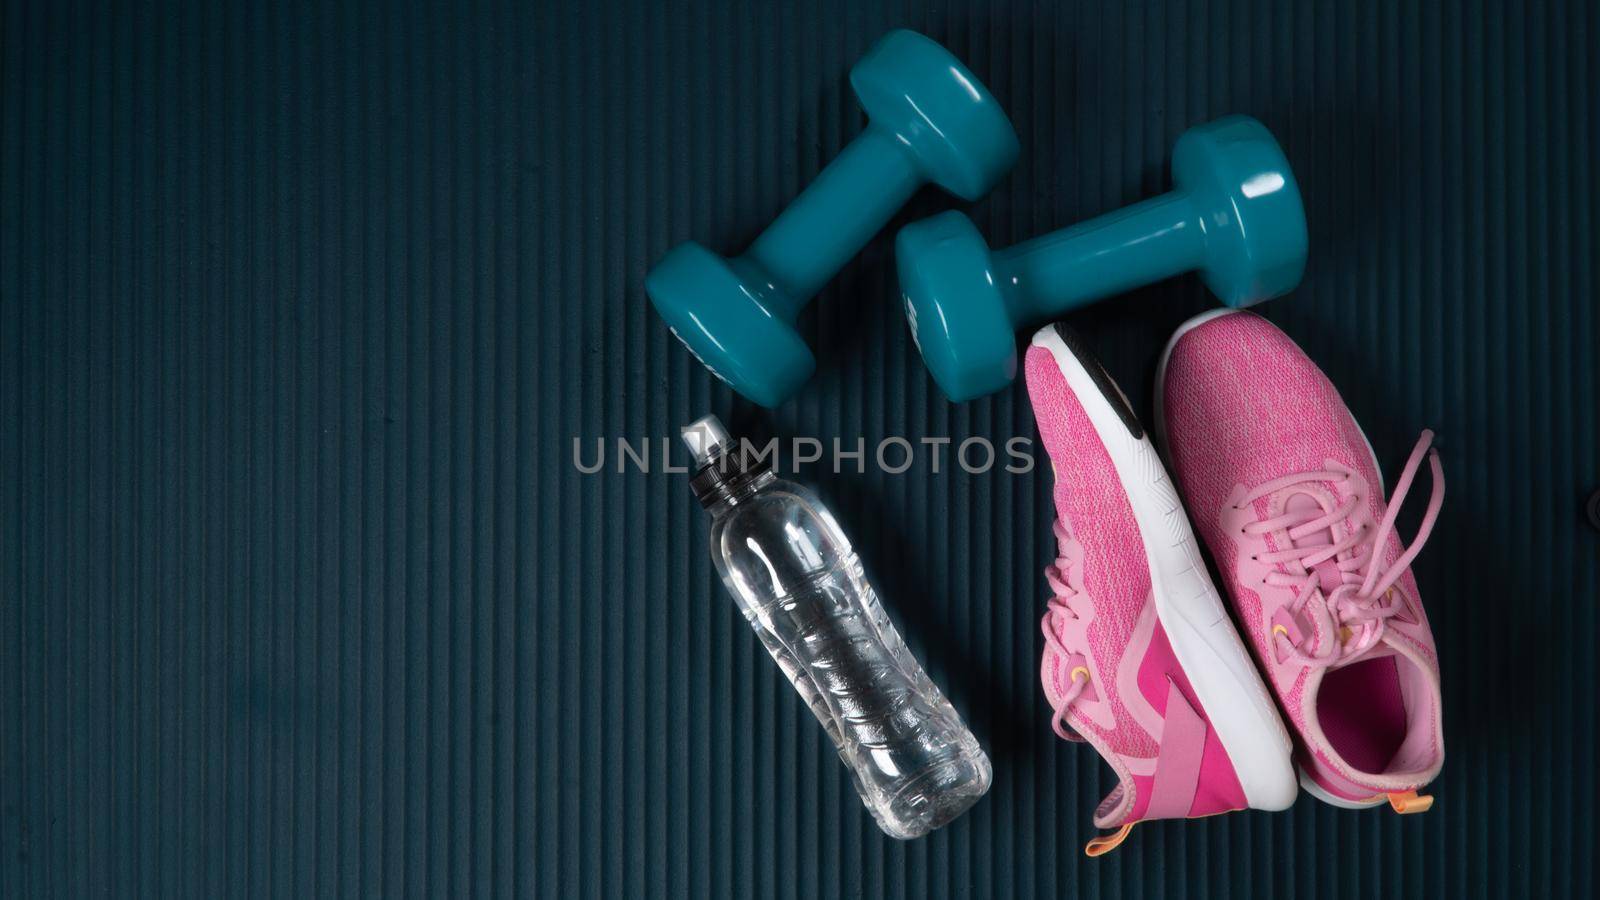 Set for athlete - women's sneakers, dumbbells and a water bottle with space for text. High quality photo